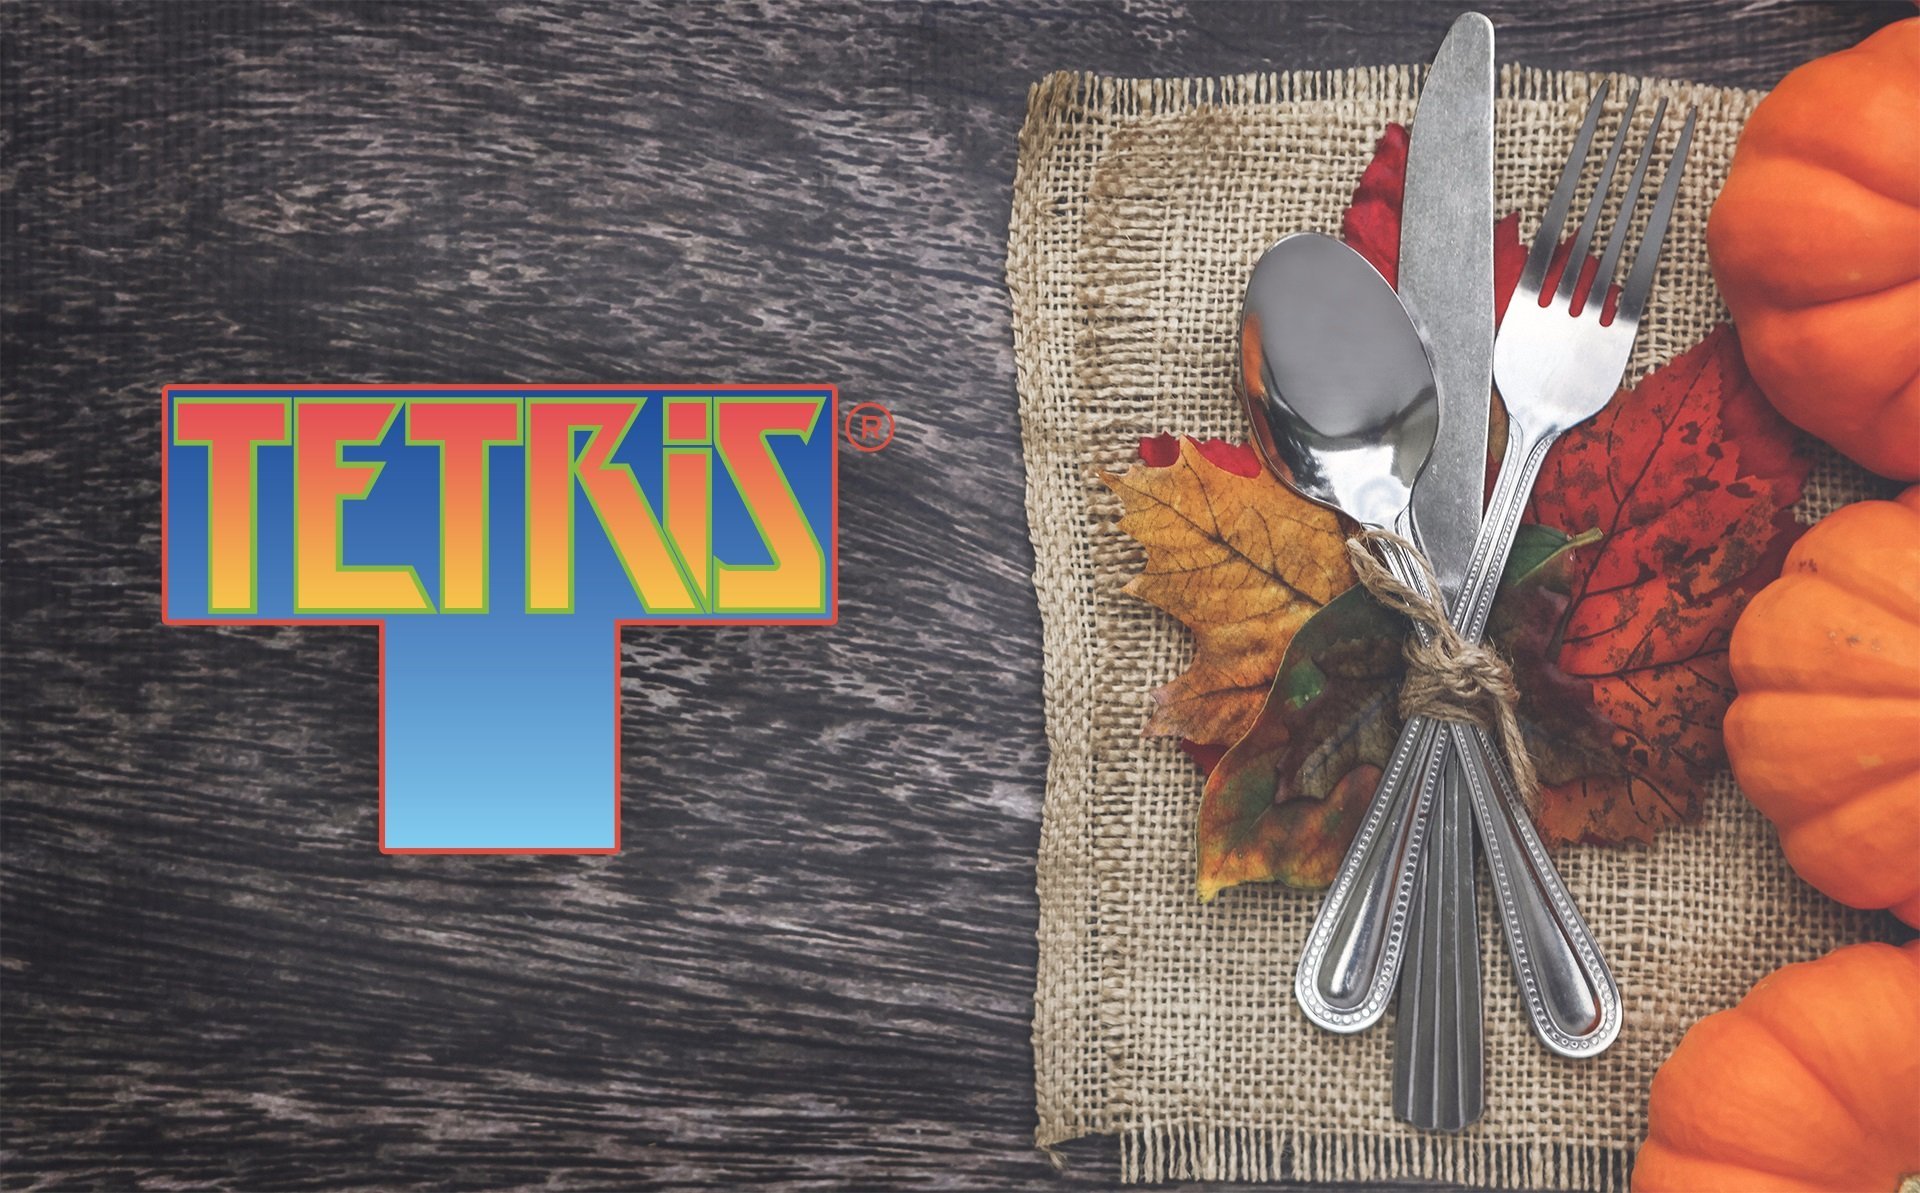 How to Add Tetris Organization to Your Thanksgiving Dinner